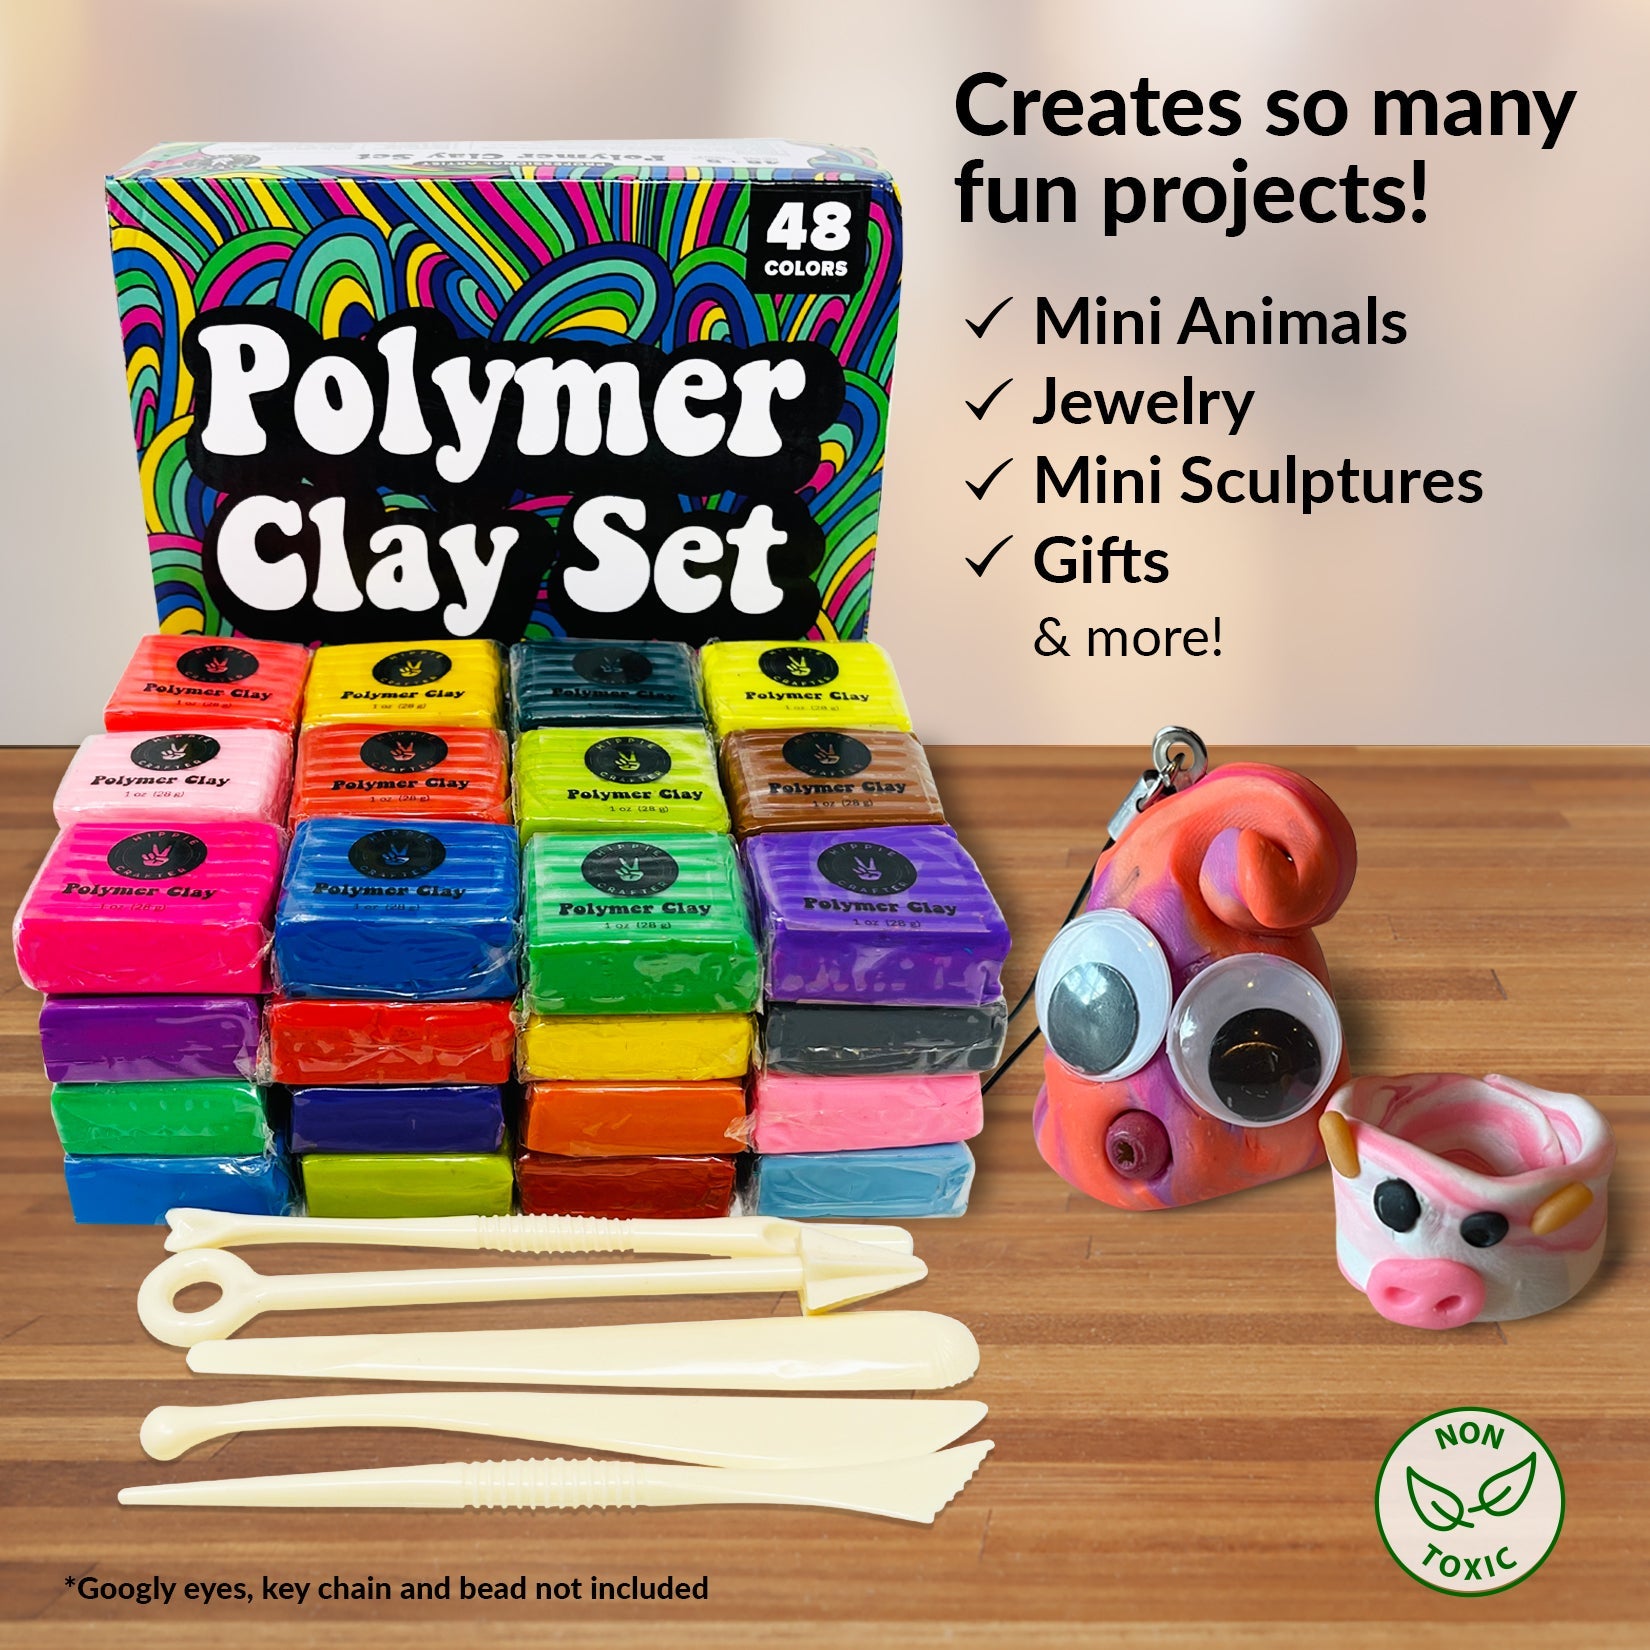  Sculpey Bake Shop Eraser Polymer Oven Bake Clay, 6 unique color  set, becomes real erasers after baking, 1 modeling tool, Great for creating  holiday, DIY projects, jewelry and school projects.